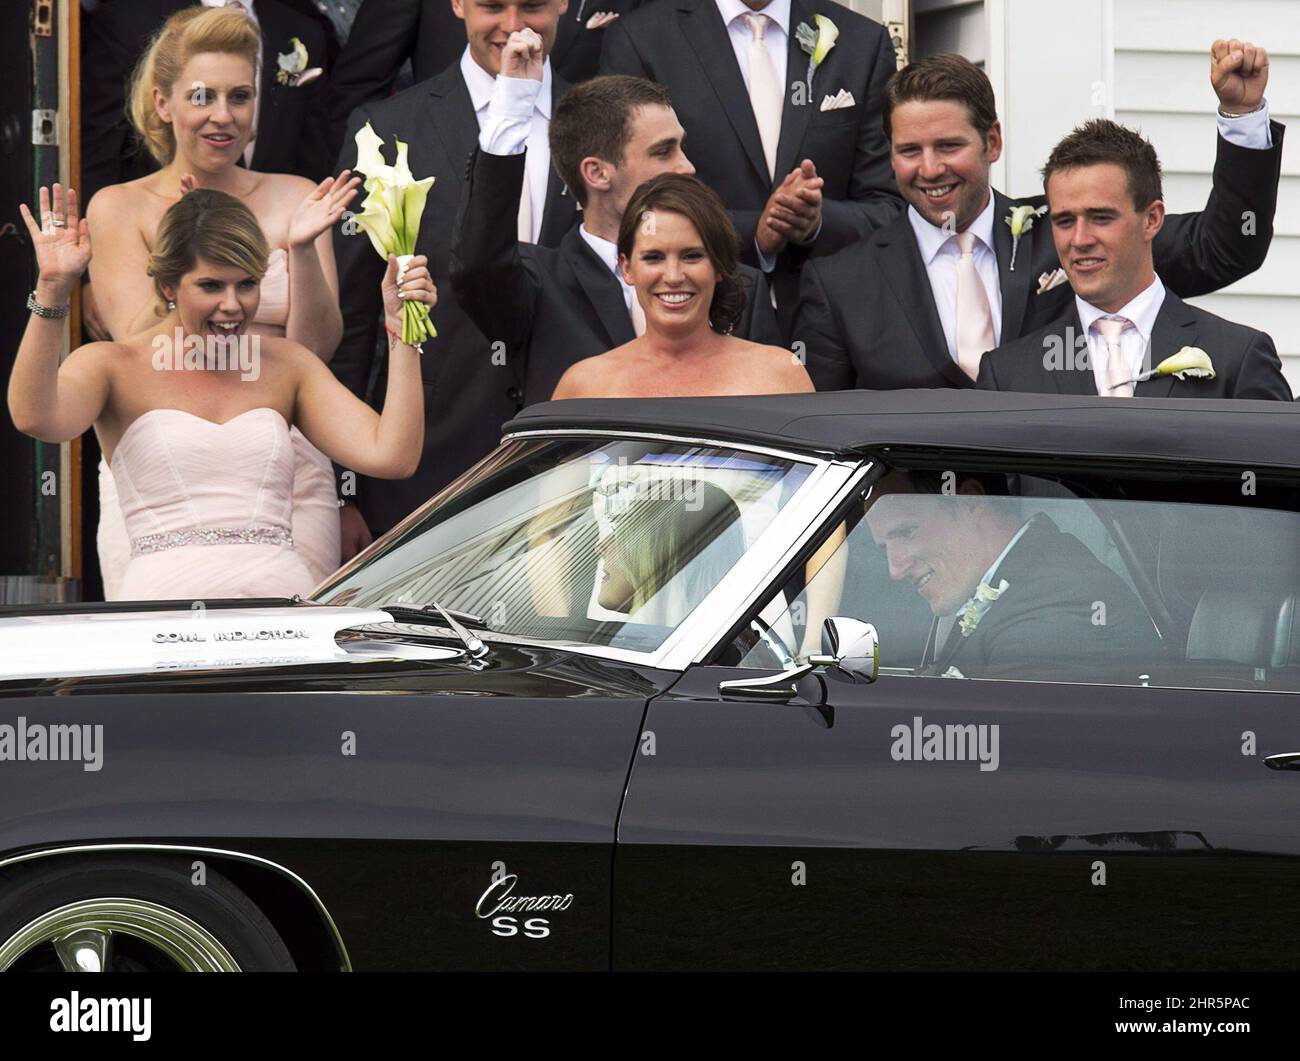 Toronto Maple Leafs captain Dion Phaneuf, right, waves as he arrives at his  wedding to actress Elisha Cuthbert at St. James Catholic Church in  Summerfield, P.E.I. on Saturday, July 6, 2013. THE